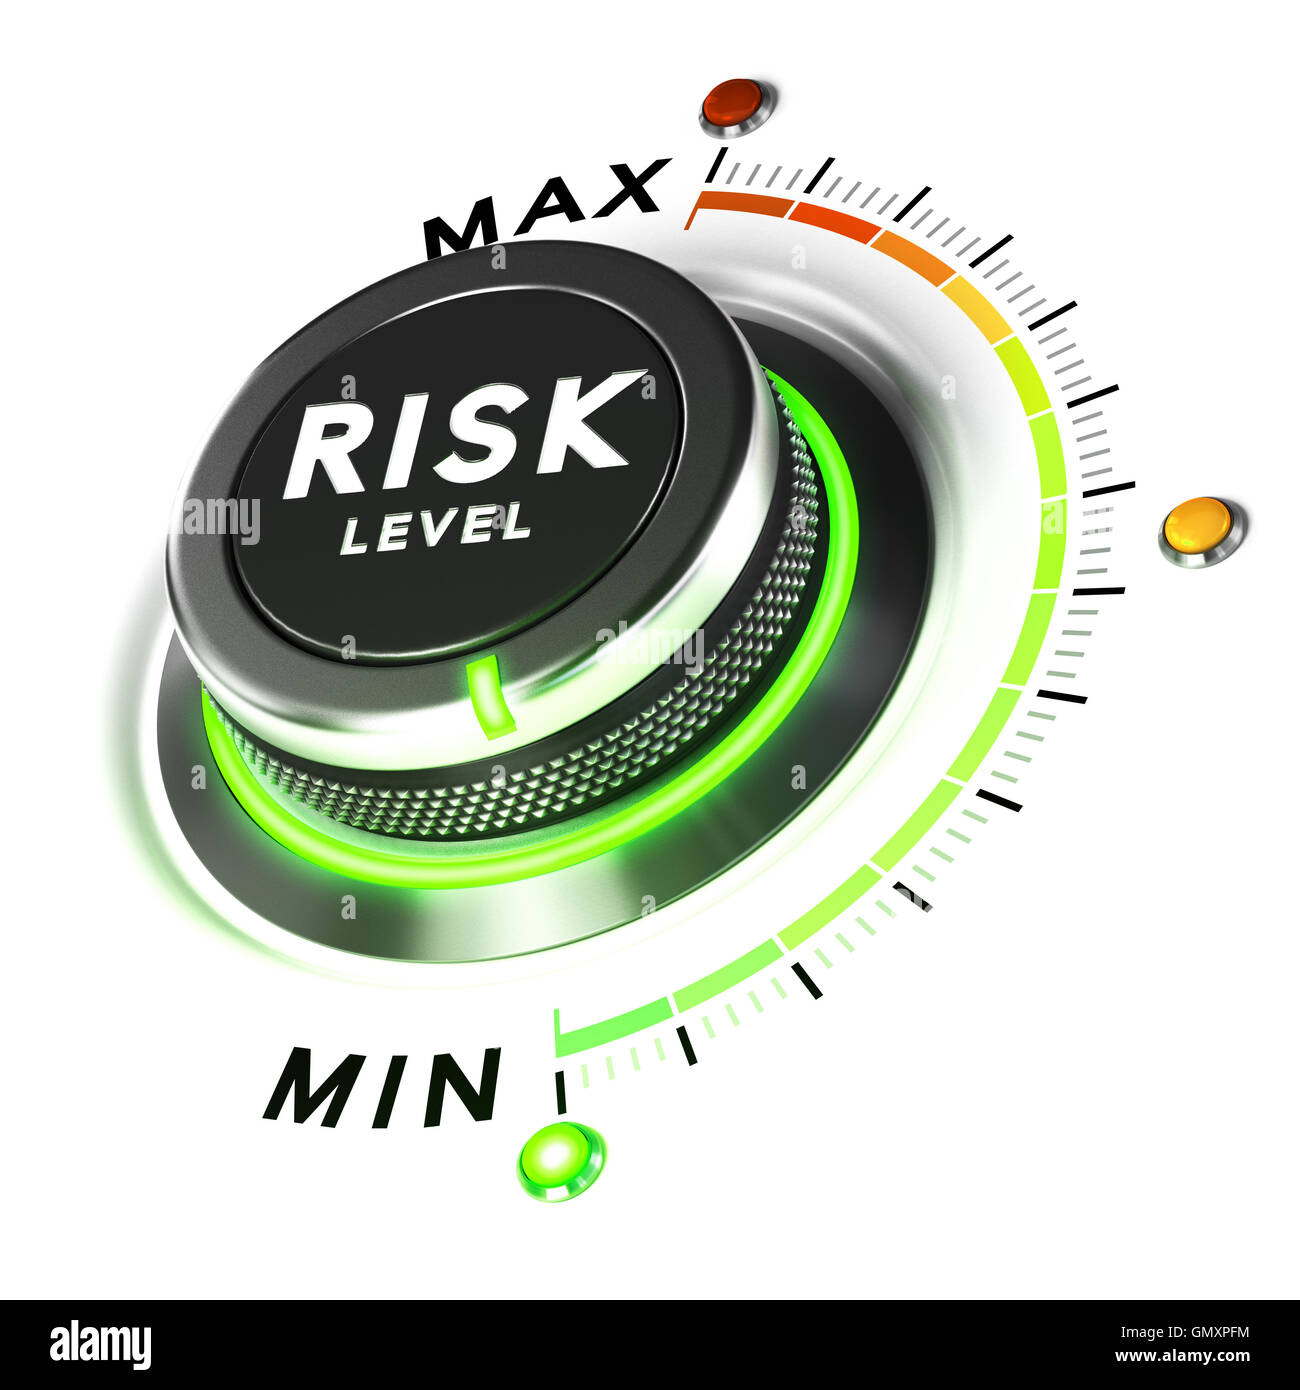 3D illustration of a risk level knob over white background. Concept of investment strategy. Stock Photo